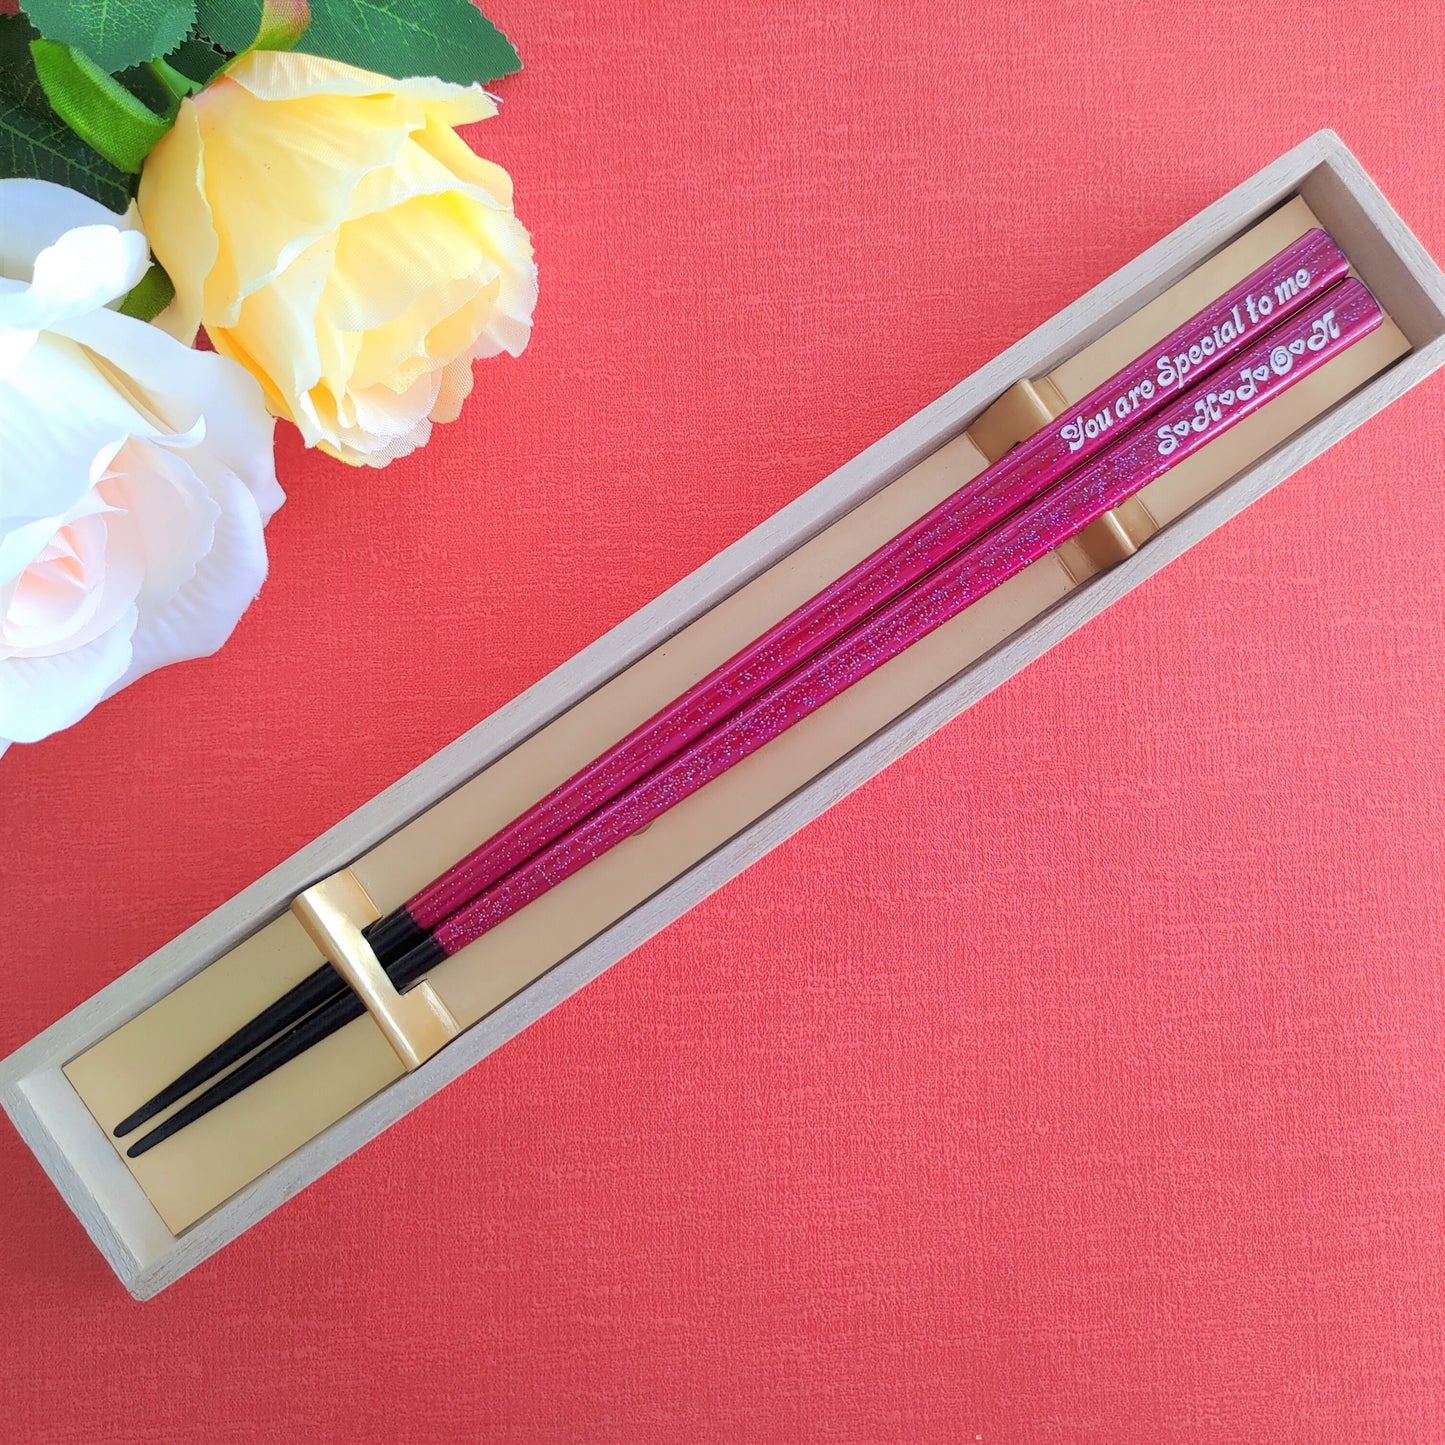 Shiny stars Japanese chopsticks blue red purple - SINGLE PAIR WITH ENGRAVED WOODEN BOX SET